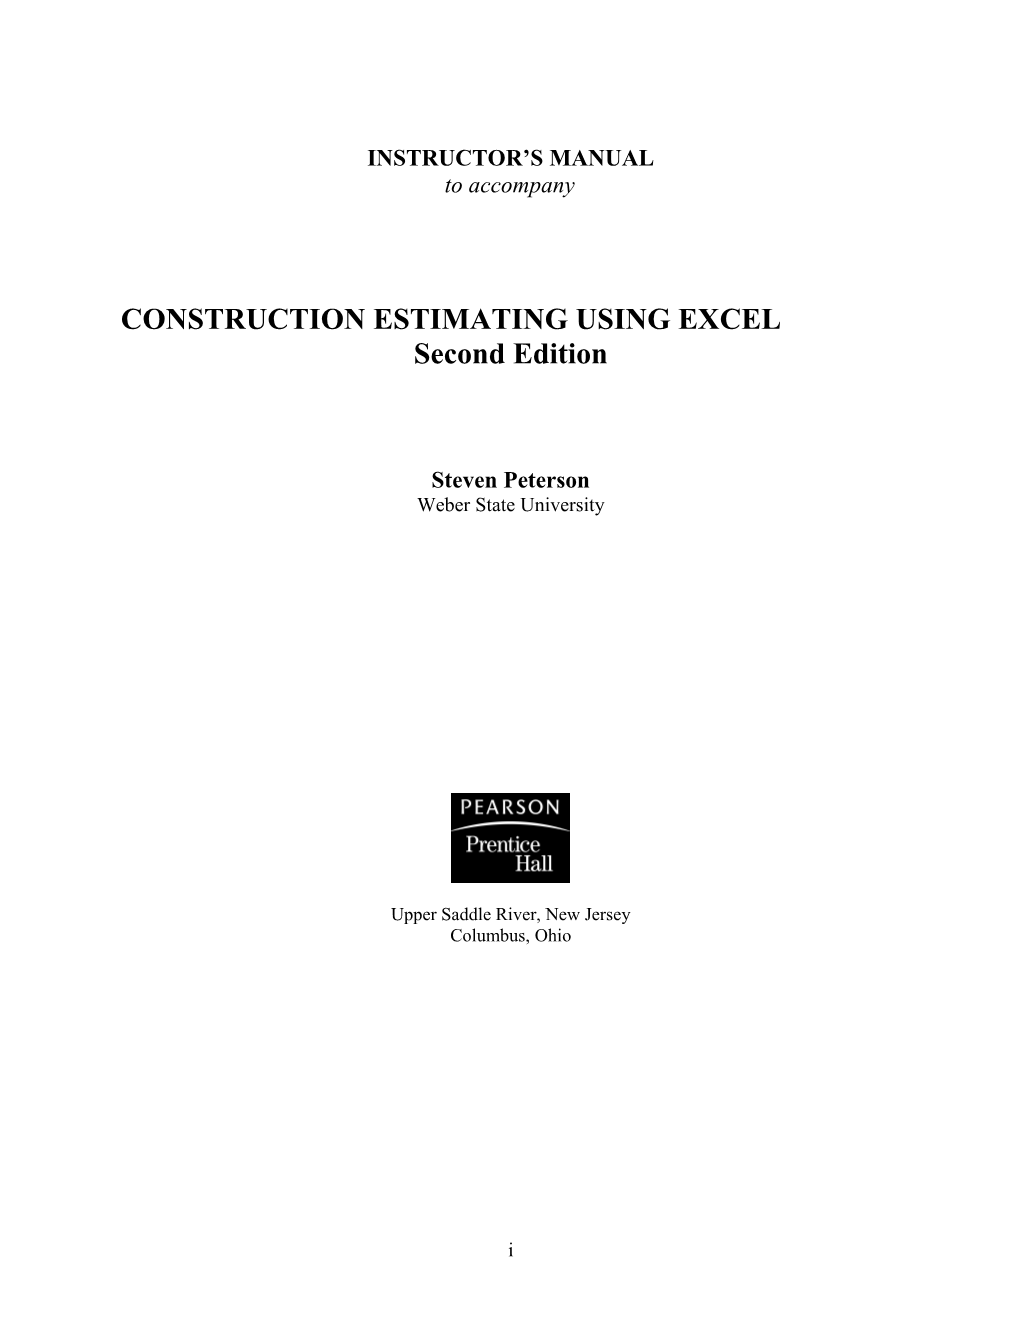 Construction Estimating Using Excelintroduction to the Instructor S Manual